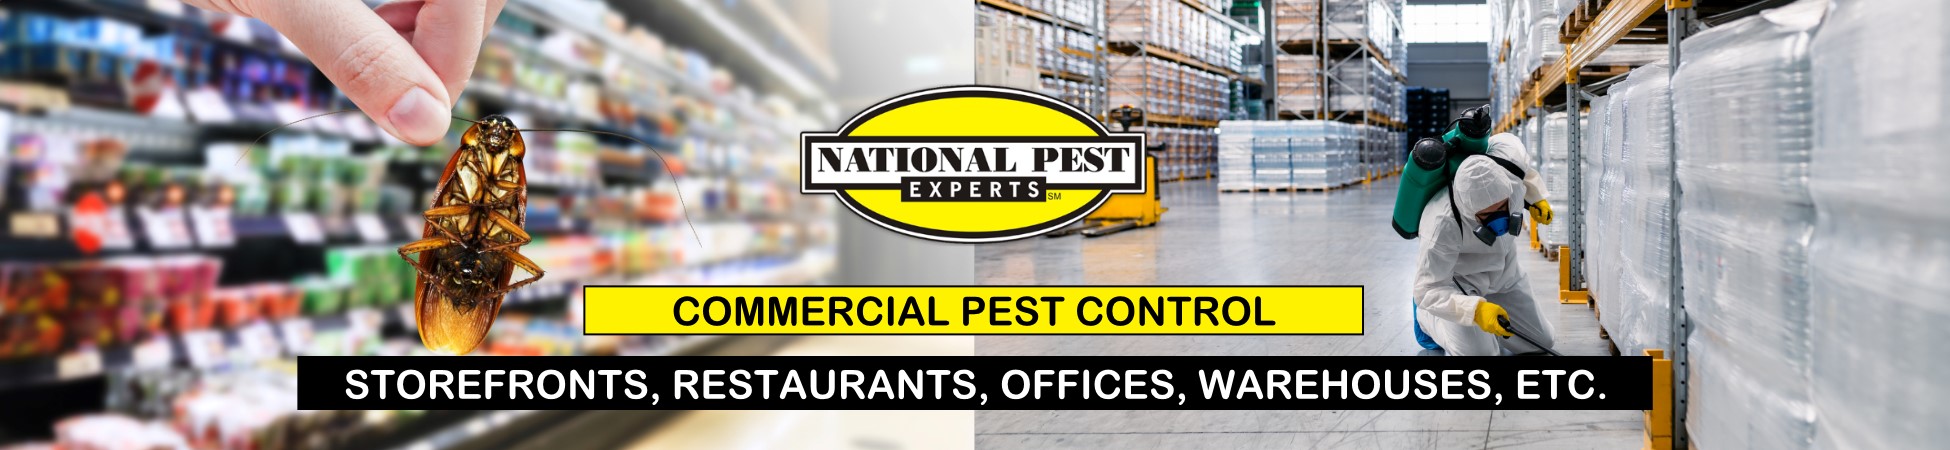 National Pest Experts - Commercial & Industrial exterminating and pest control in Lloyd Harbor, NY